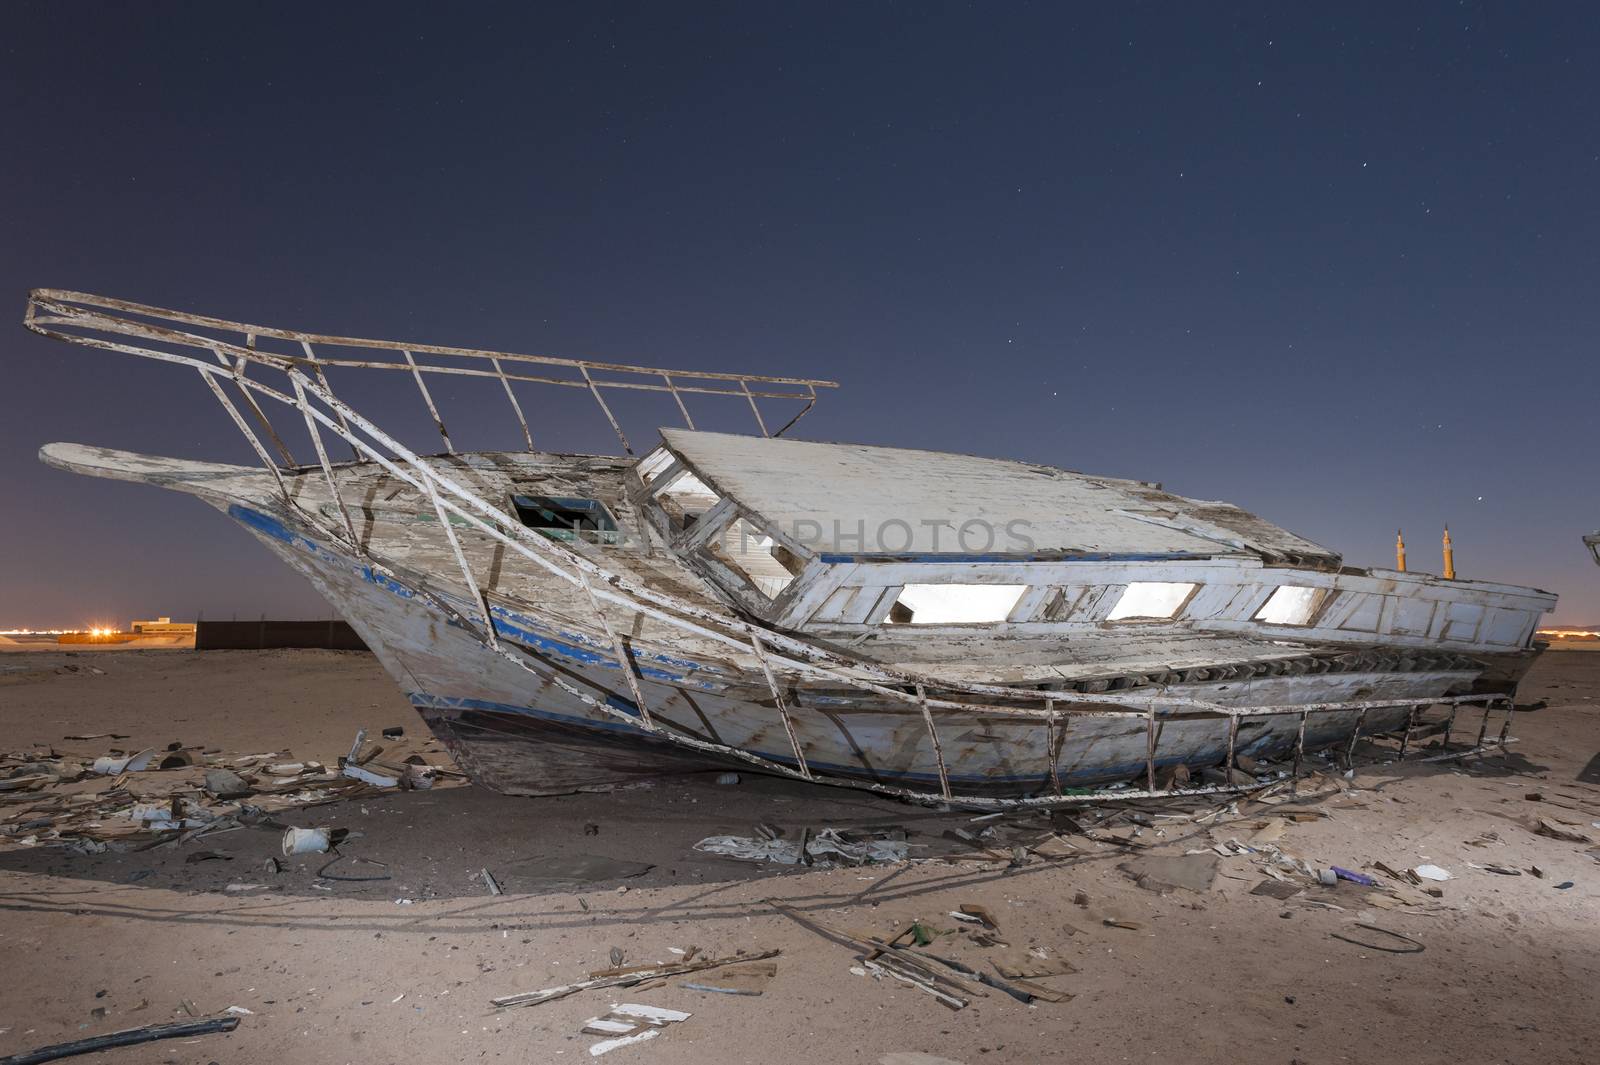 Abandoned derelict wooden boats in the desert under a night sky with abstract lighting effects